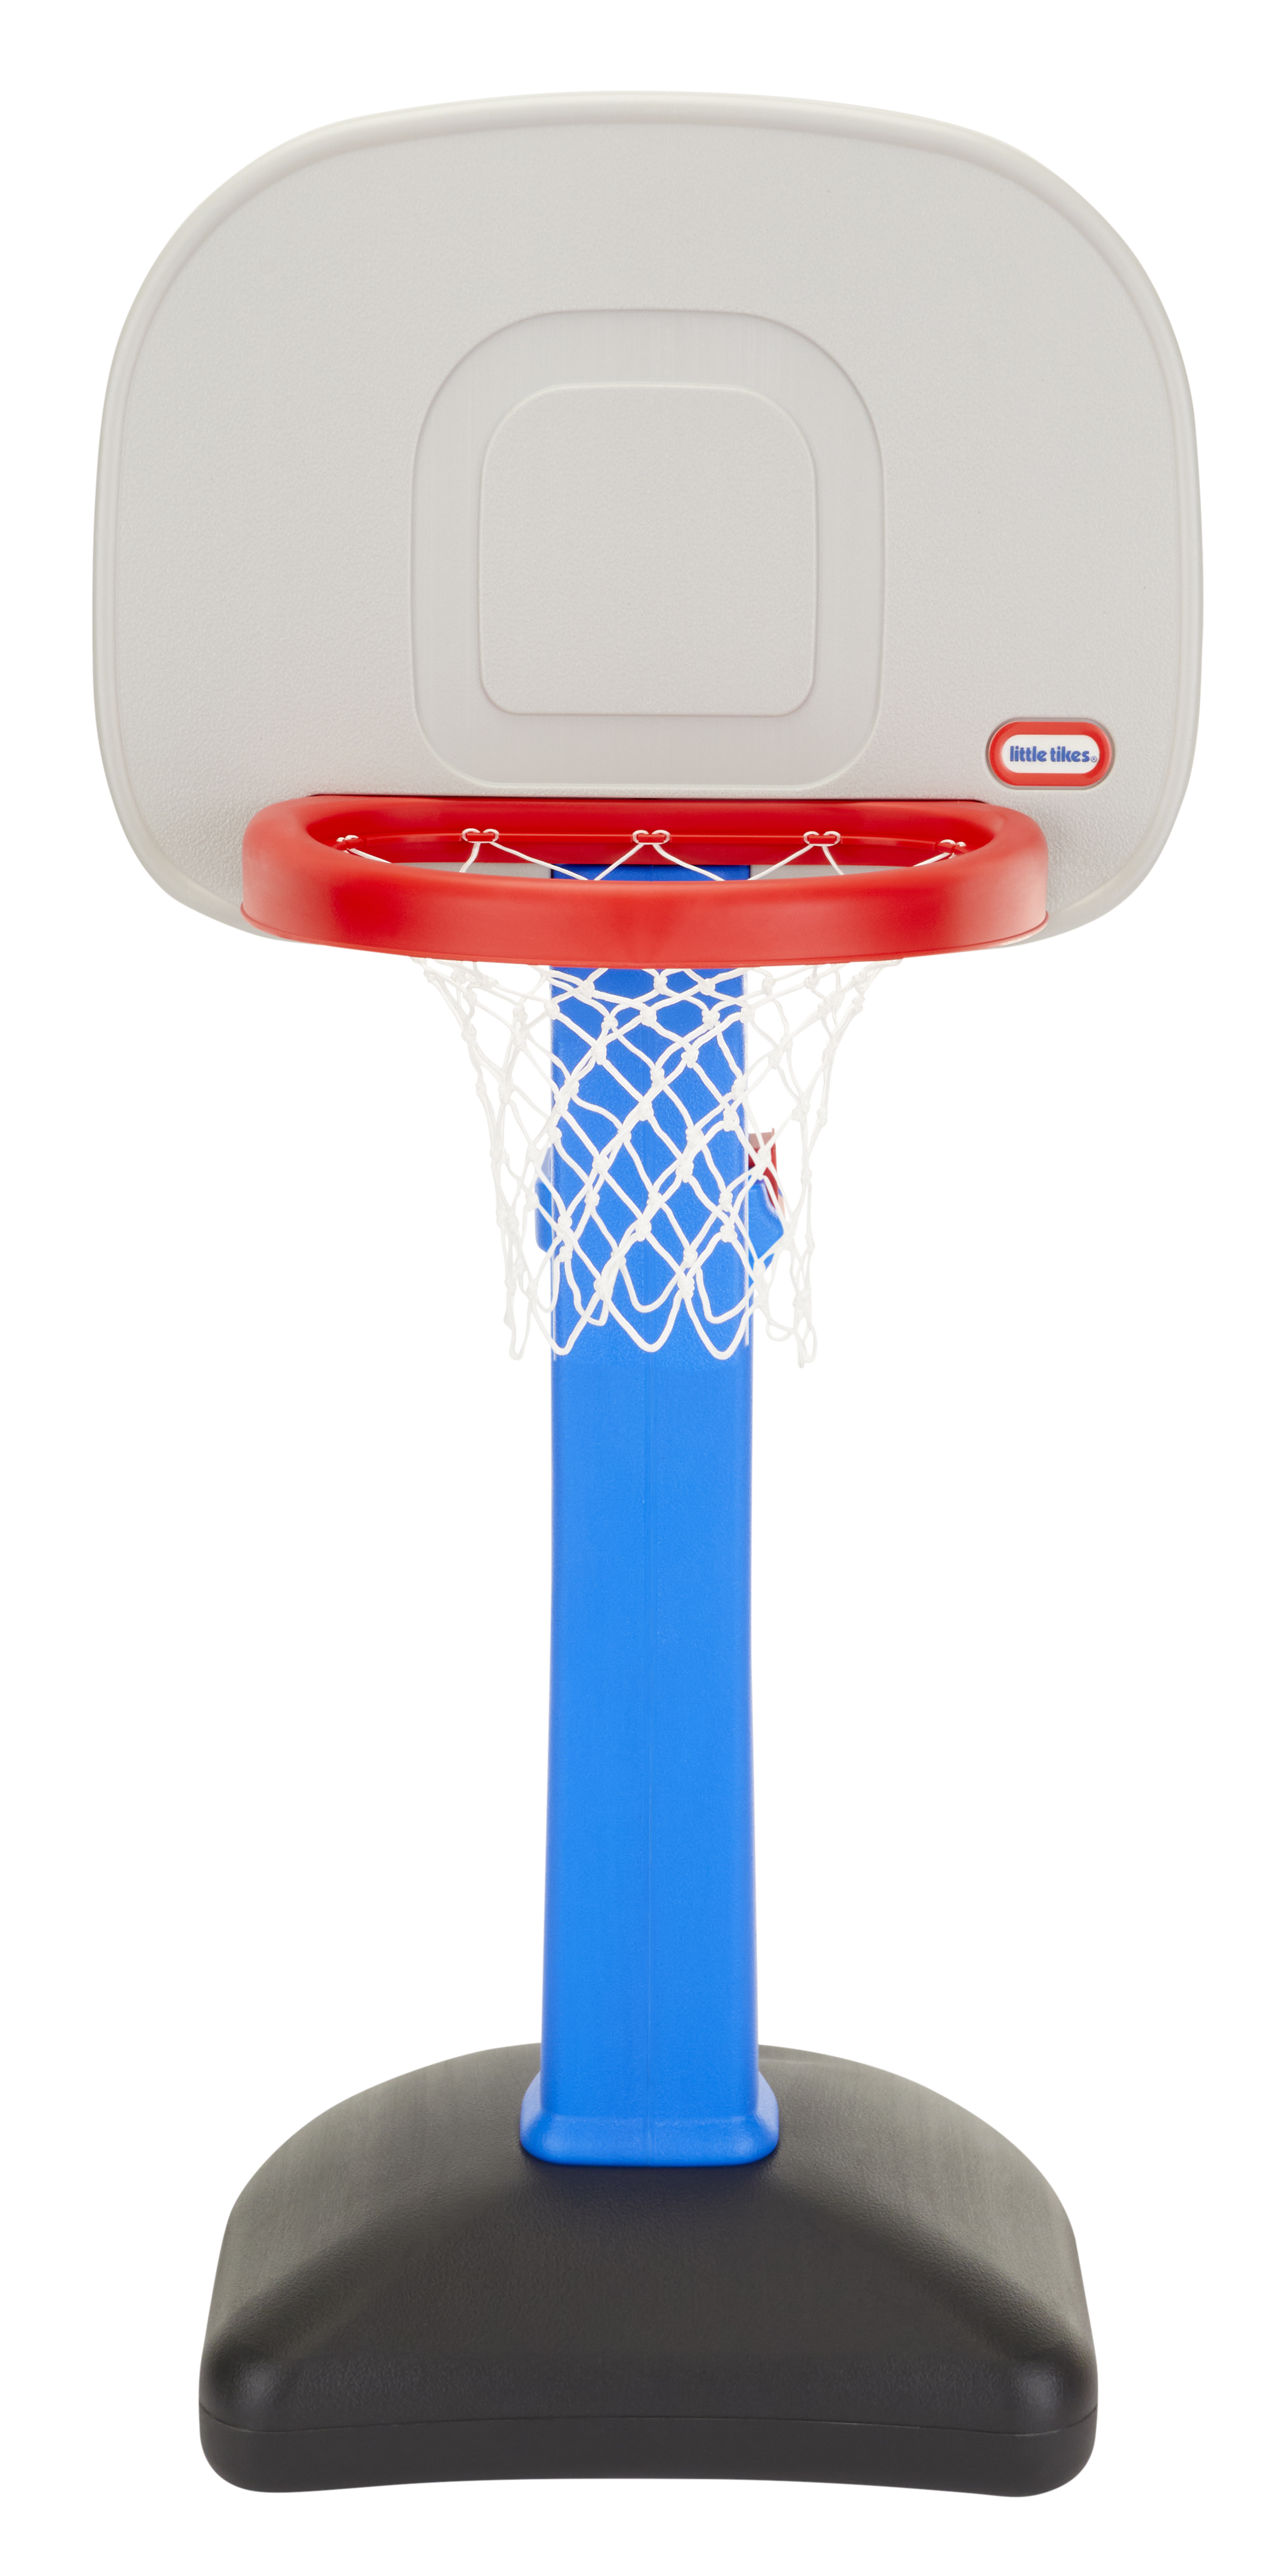 Little Tikes TotSports Easy Score Toy Basketball Hoop with Ball, Height Adjustable, Indoor Outdoor Backyard Toy Sports Play Set For Kids Girls Boys Ages 18 months to 5 Year Old, Blue - image 3 of 6